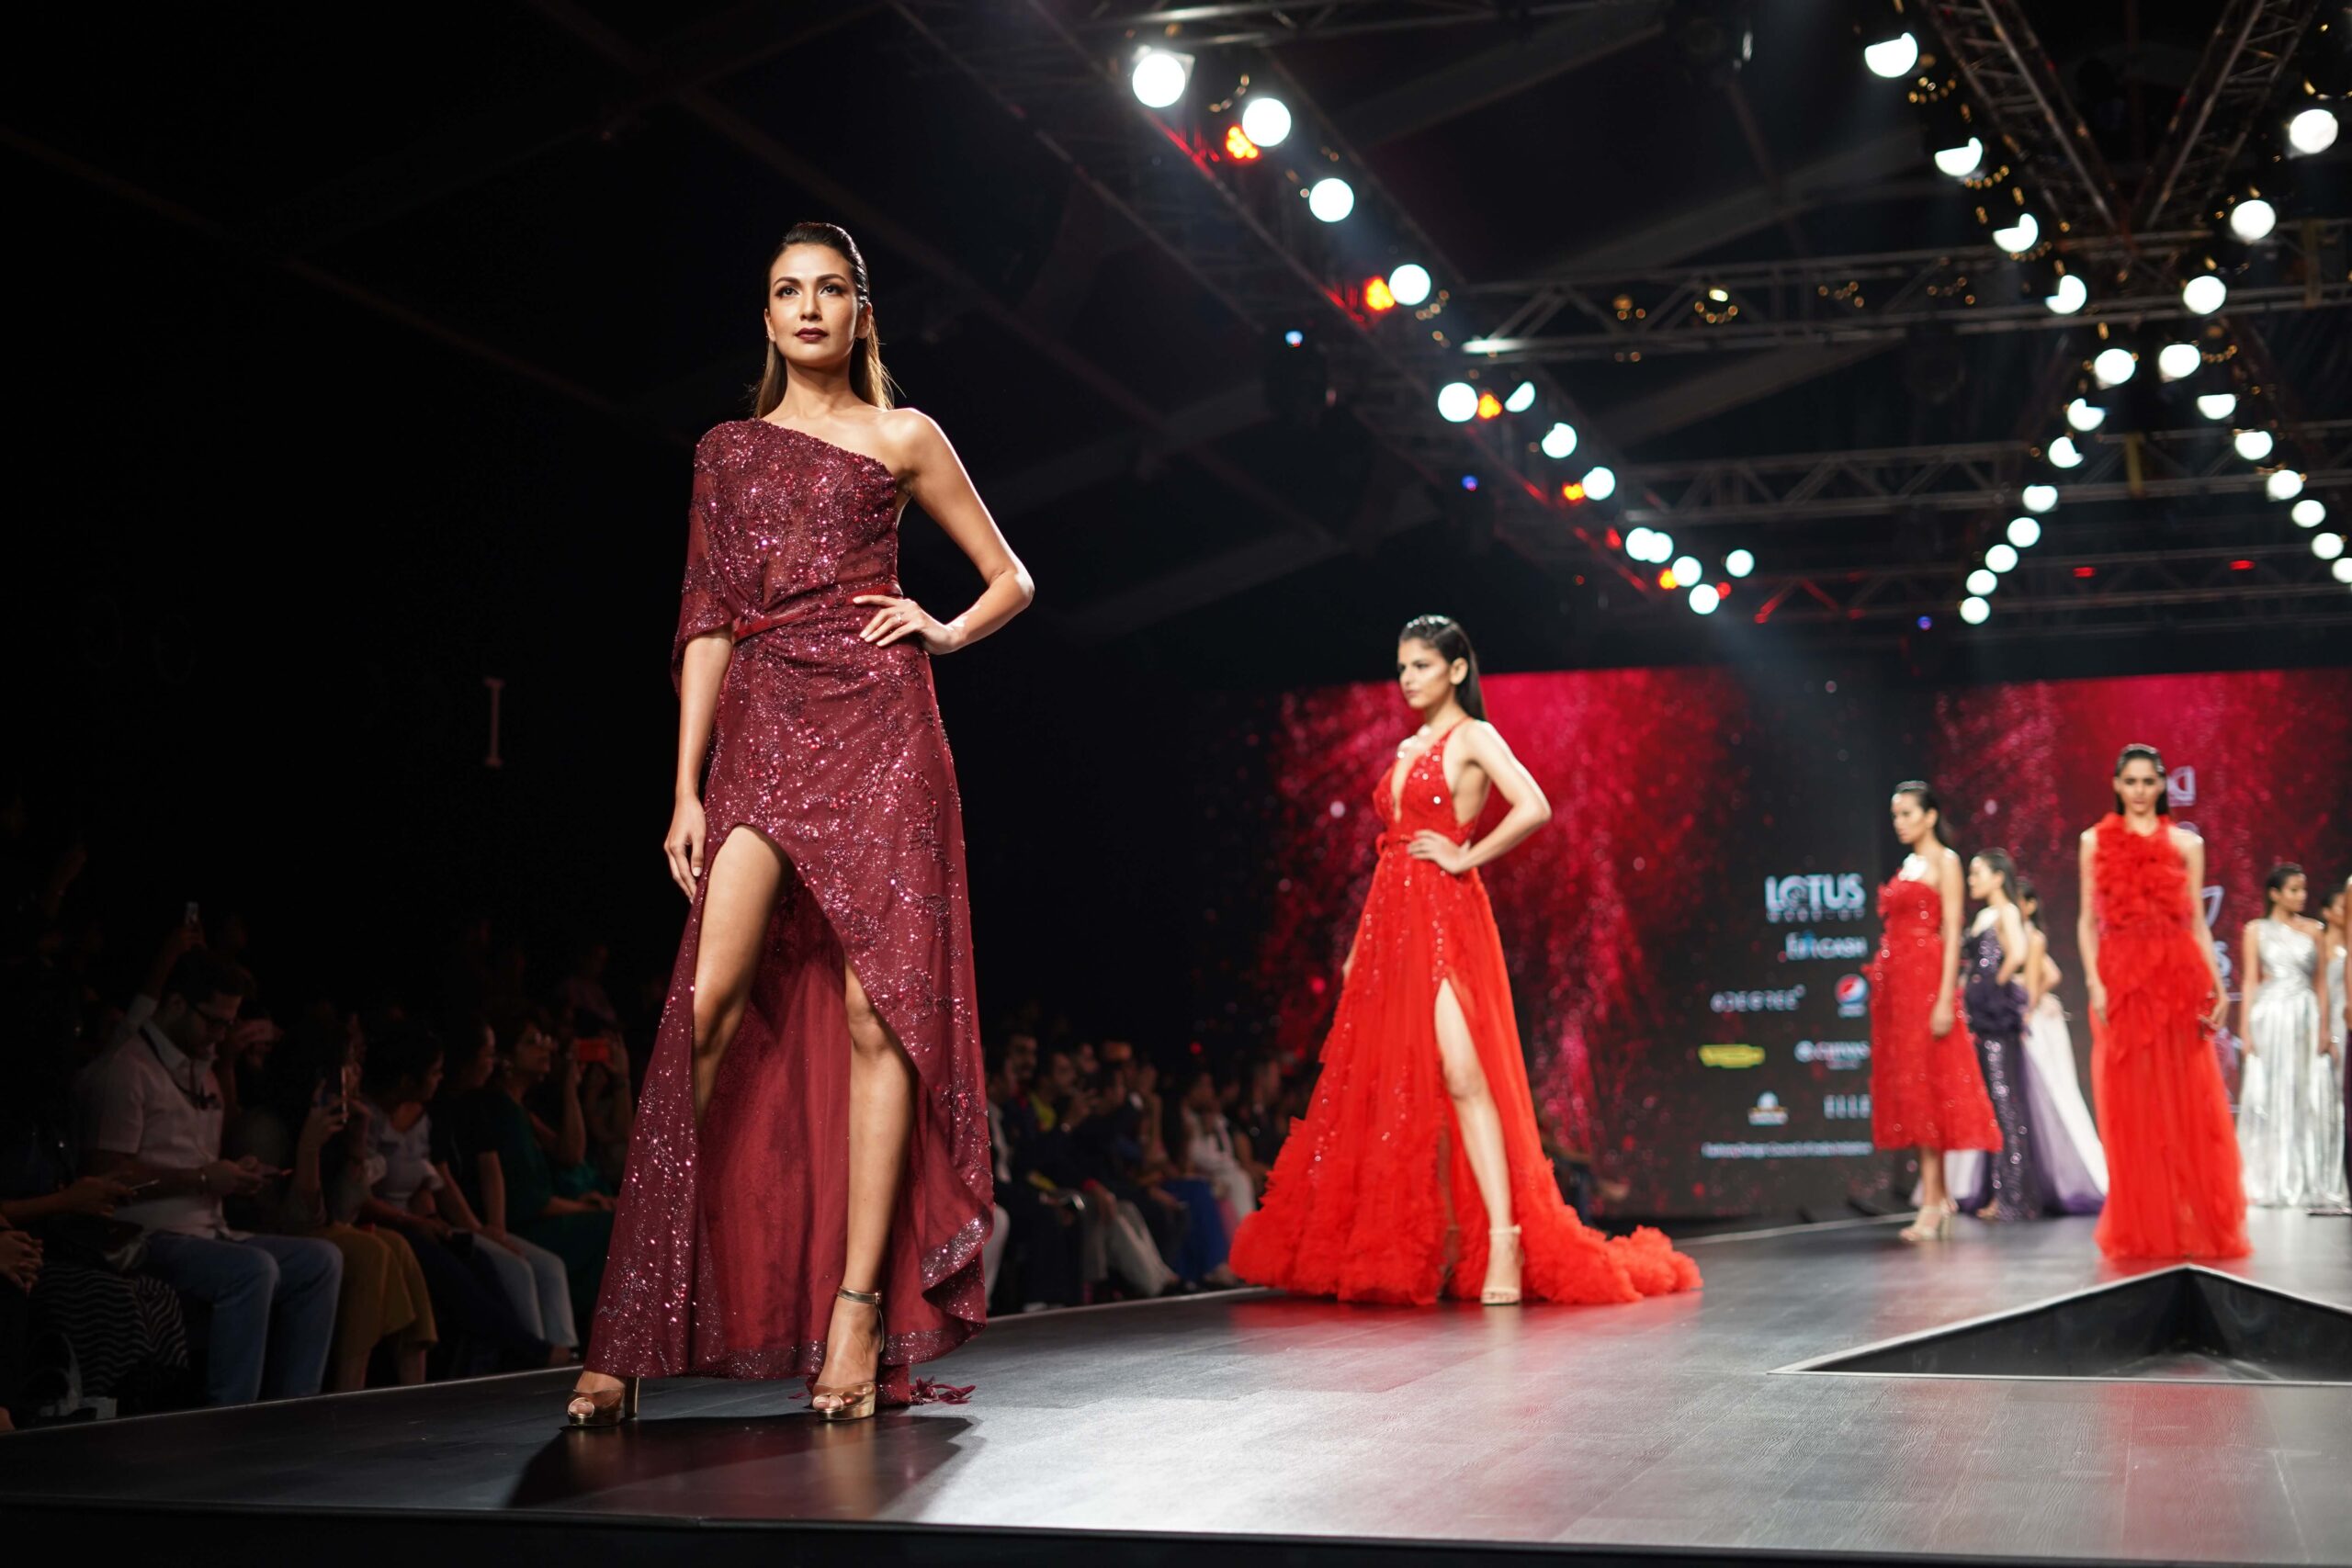 What is Fashion Event Management and How Can You Make a Career in it (4) what is fashion event management - What is Fashion Event Management and How Can You Make a Career in it 4 scaled - What is Fashion Event Management and How Can You Make a Career in it?